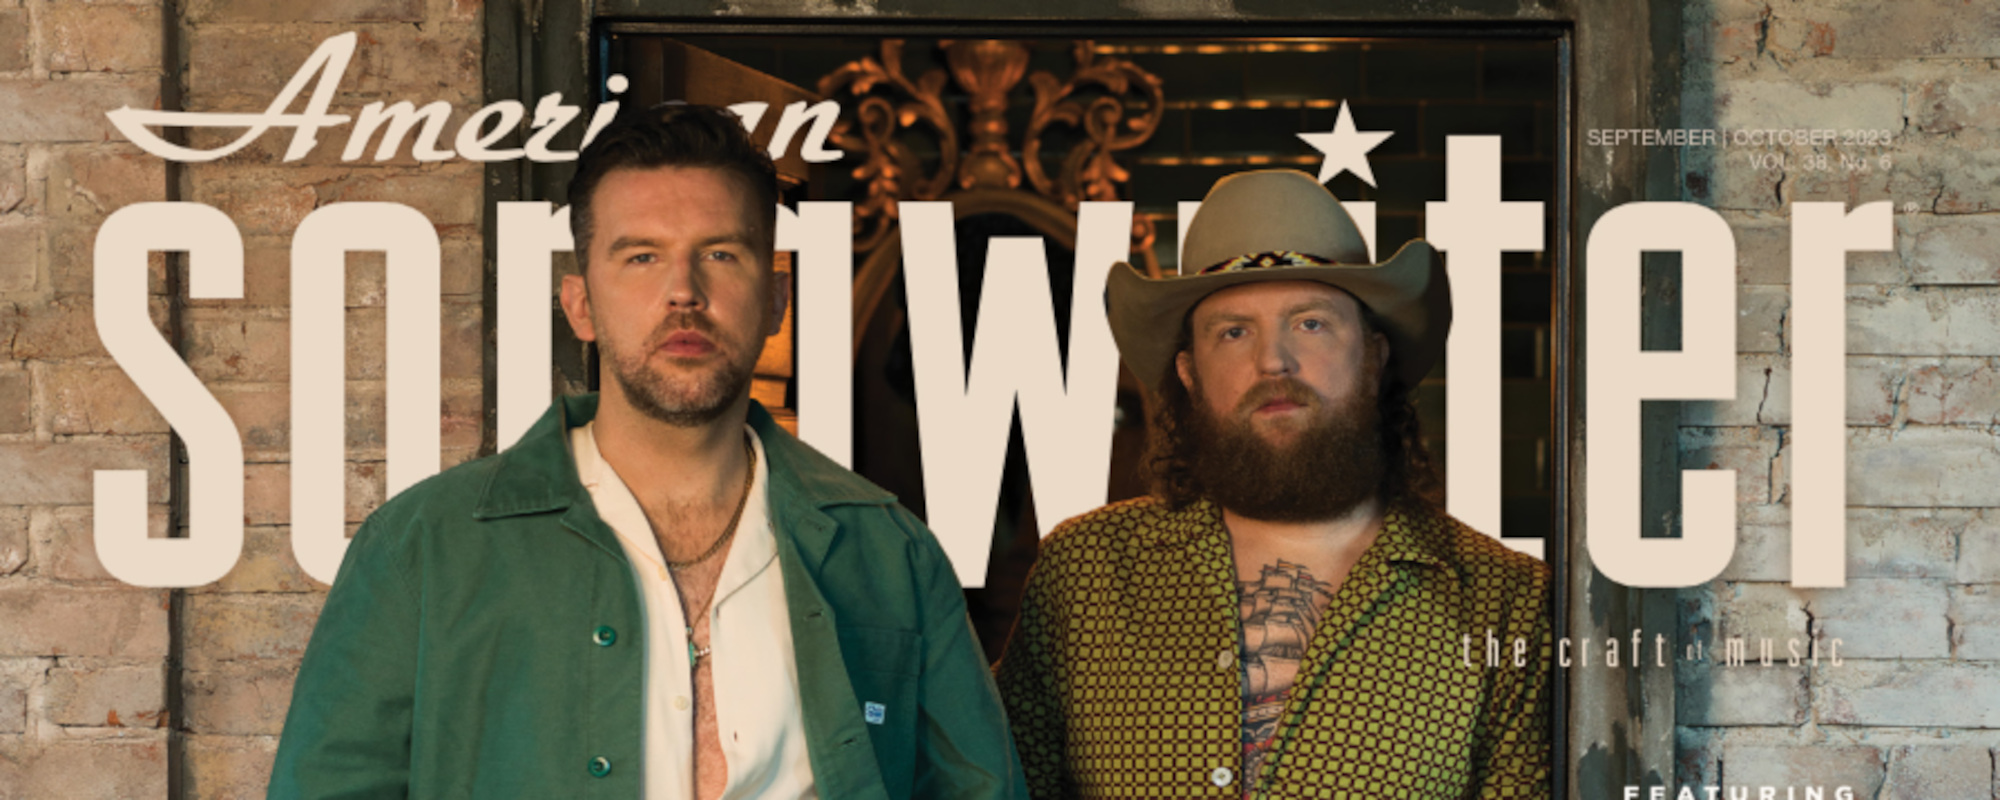 American Songwriter September/October Cover Story: Brothers Osborne—Nothing to Hide